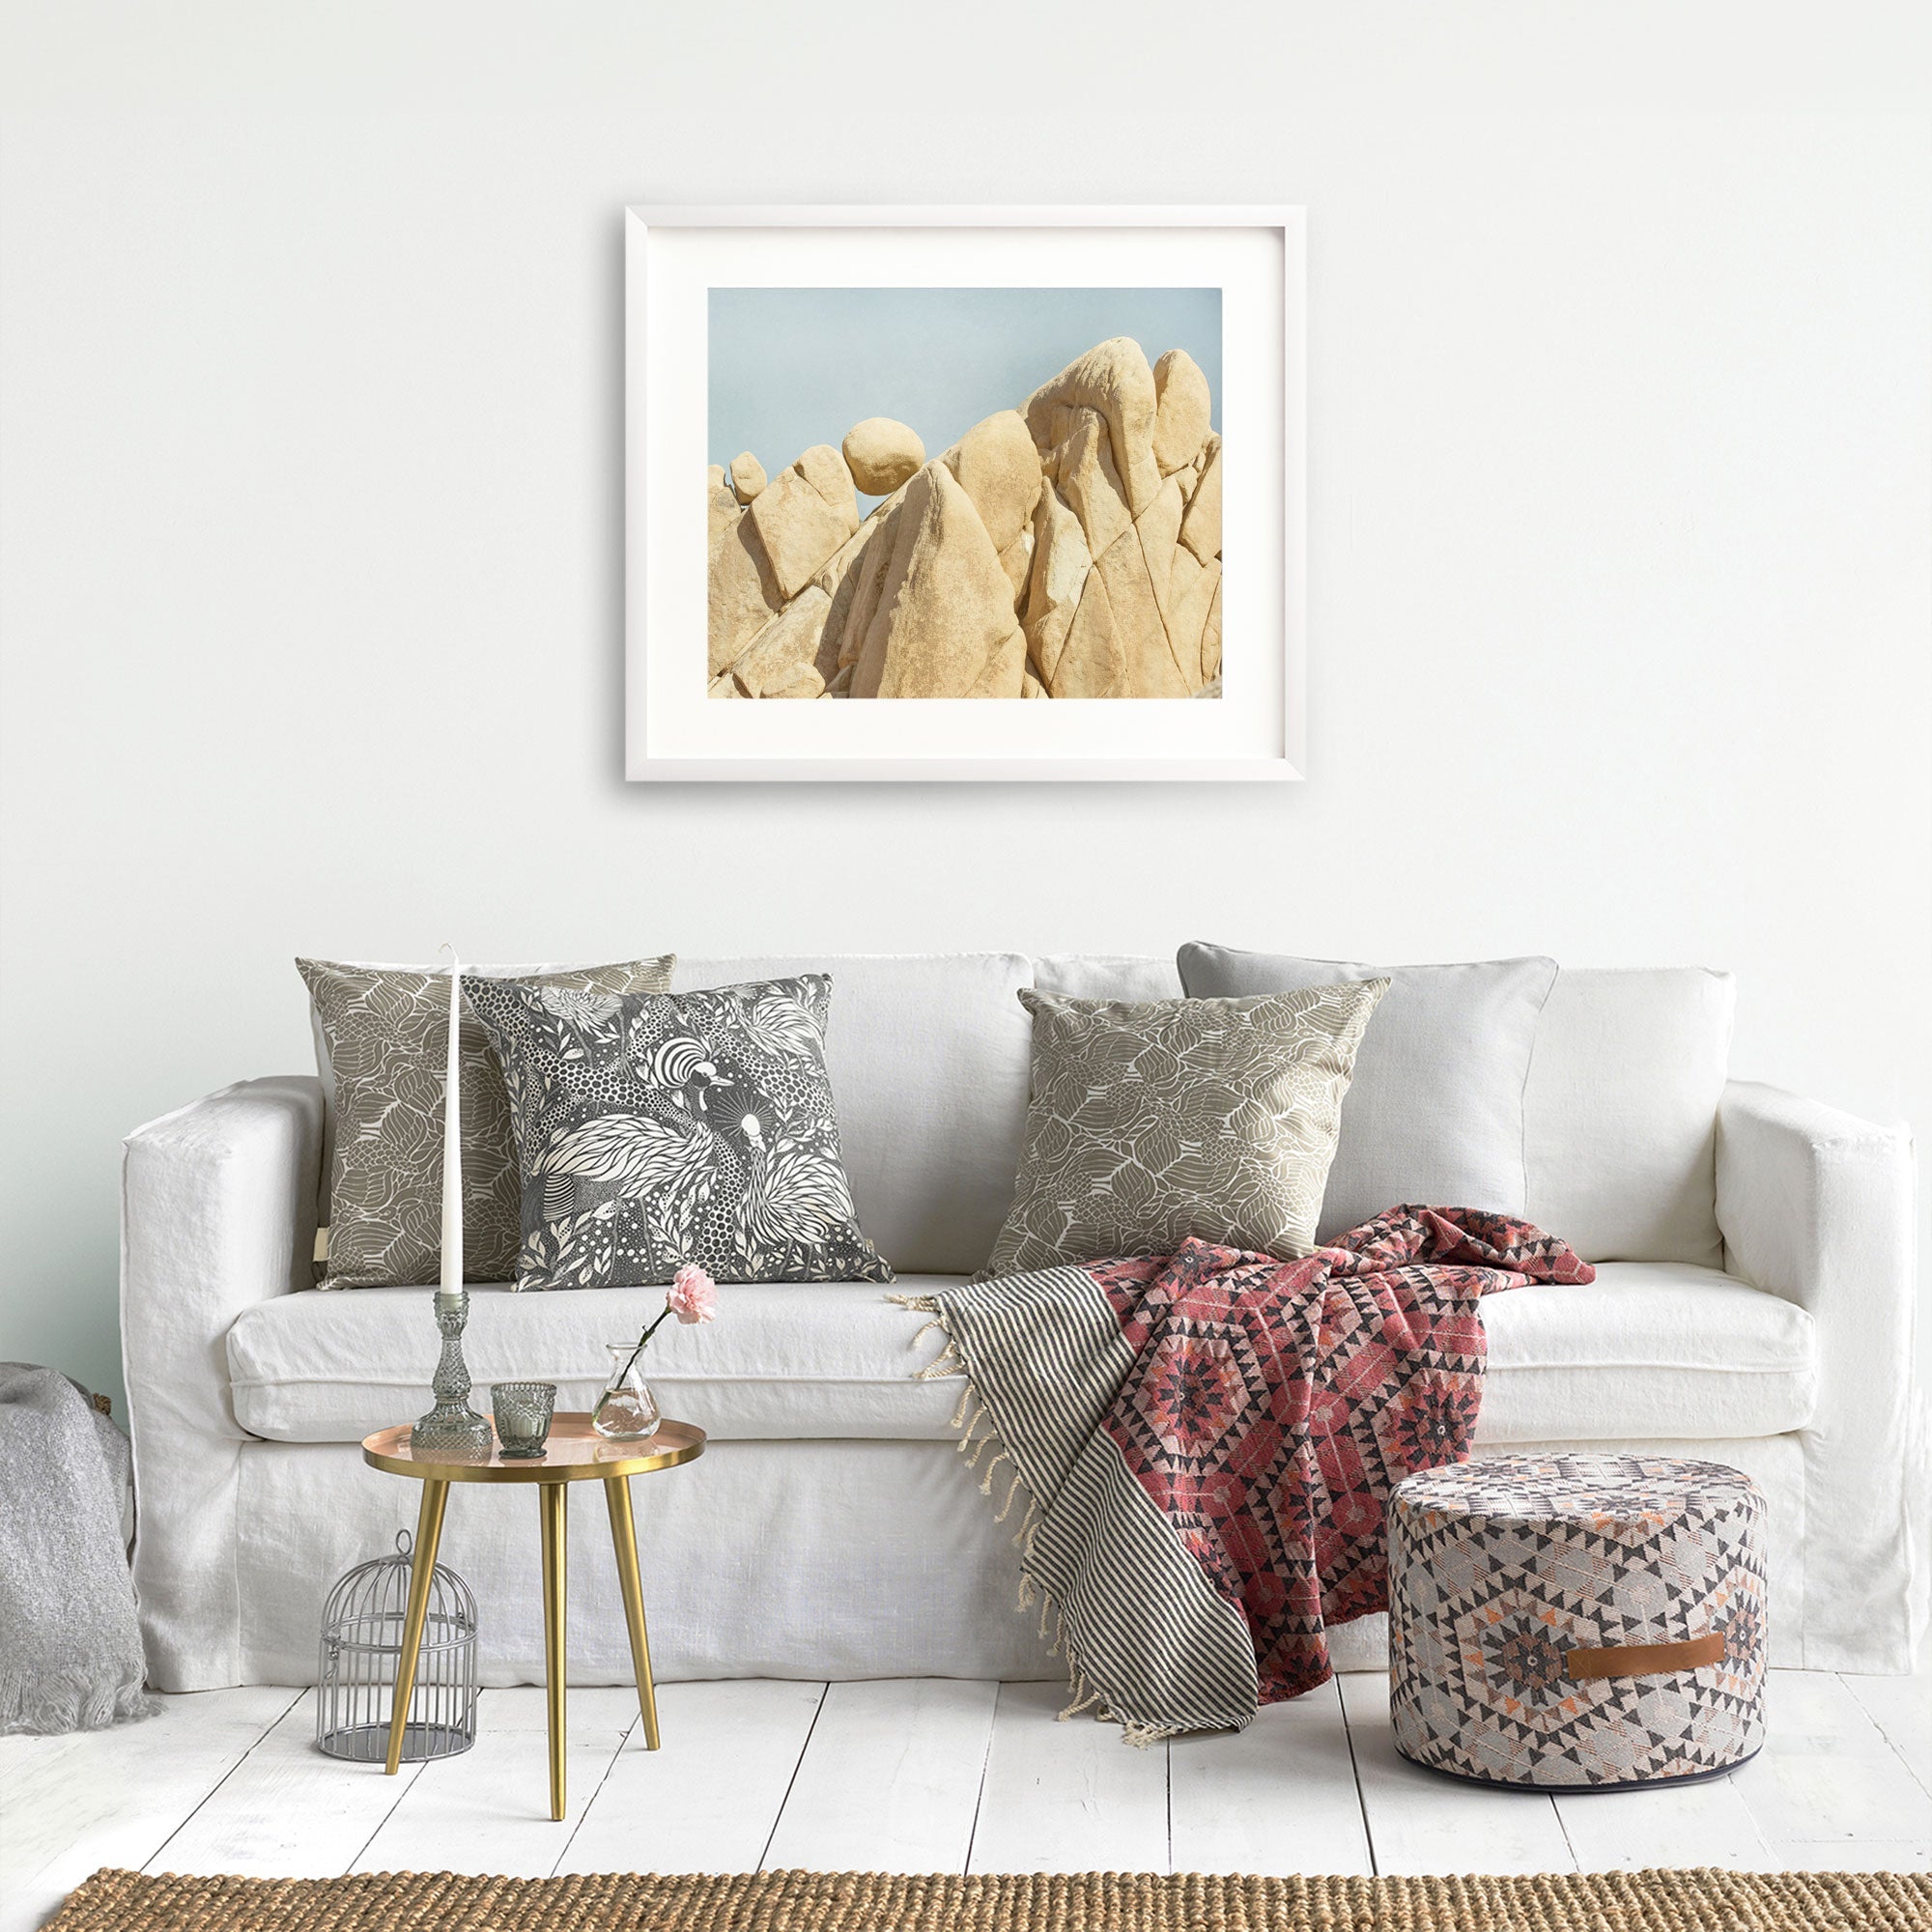 A cozy living room with a white sofa adorned with patterned cushions, a red patterned throw, a small coffee table with books and a vase, an unframed Offley Green print of Joshua Tree National Park &#39;Rock Formations&#39;.